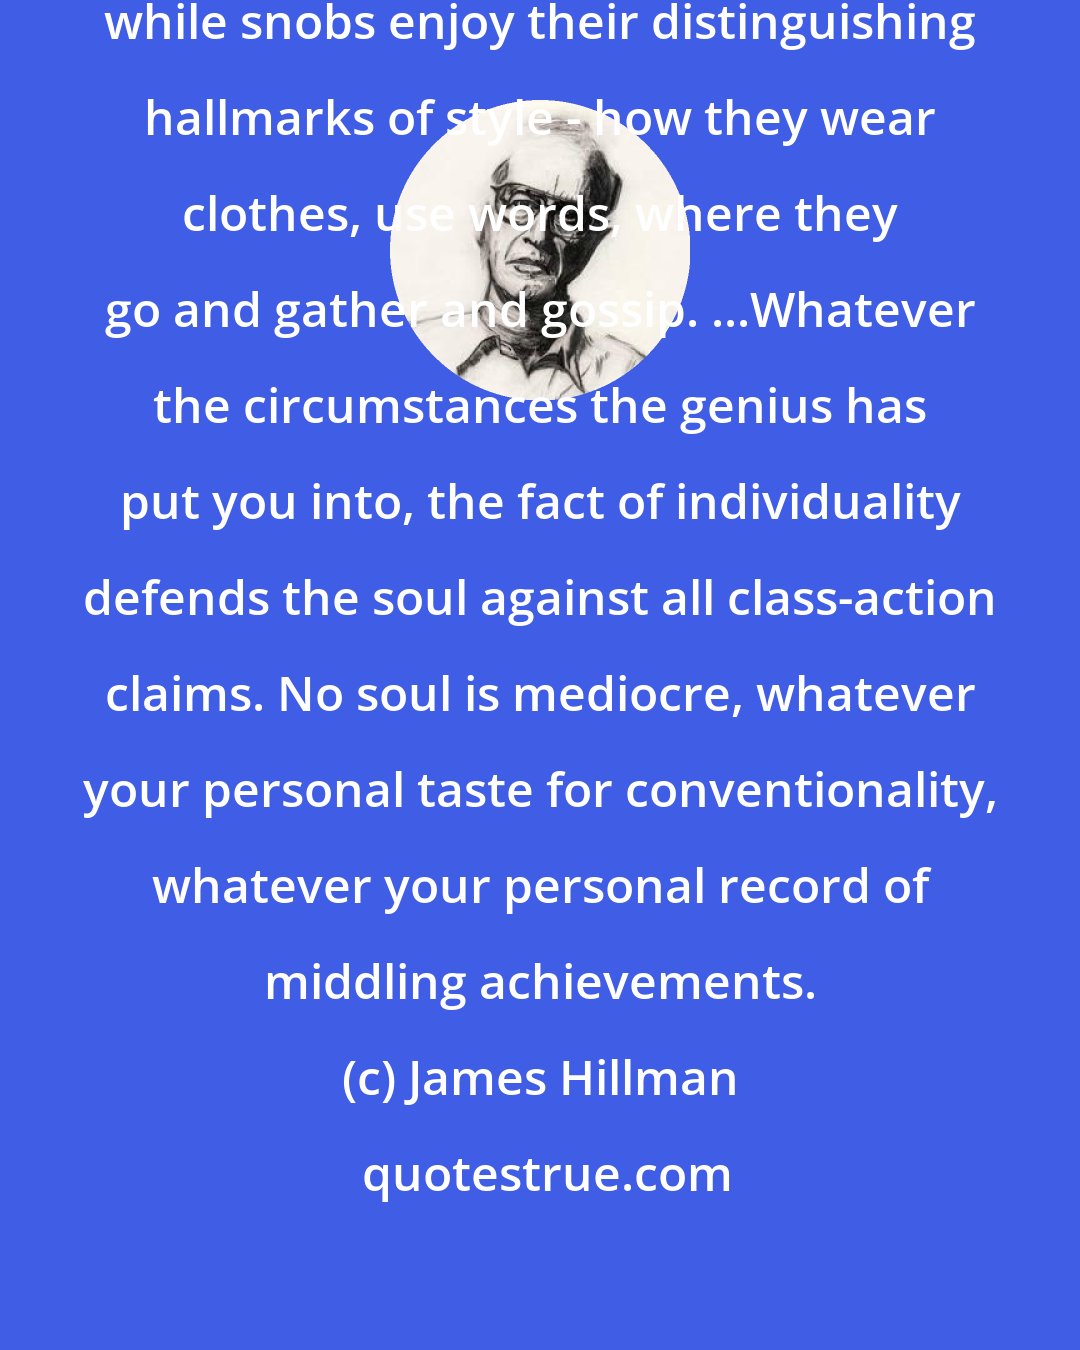 James Hillman: 'Mediocre' tends to mean 'undistinguished', while snobs enjoy their distinguishing hallmarks of style - how they wear clothes, use words, where they go and gather and gossip. ...Whatever the circumstances the genius has put you into, the fact of individuality defends the soul against all class-action claims. No soul is mediocre, whatever your personal taste for conventionality, whatever your personal record of middling achievements.